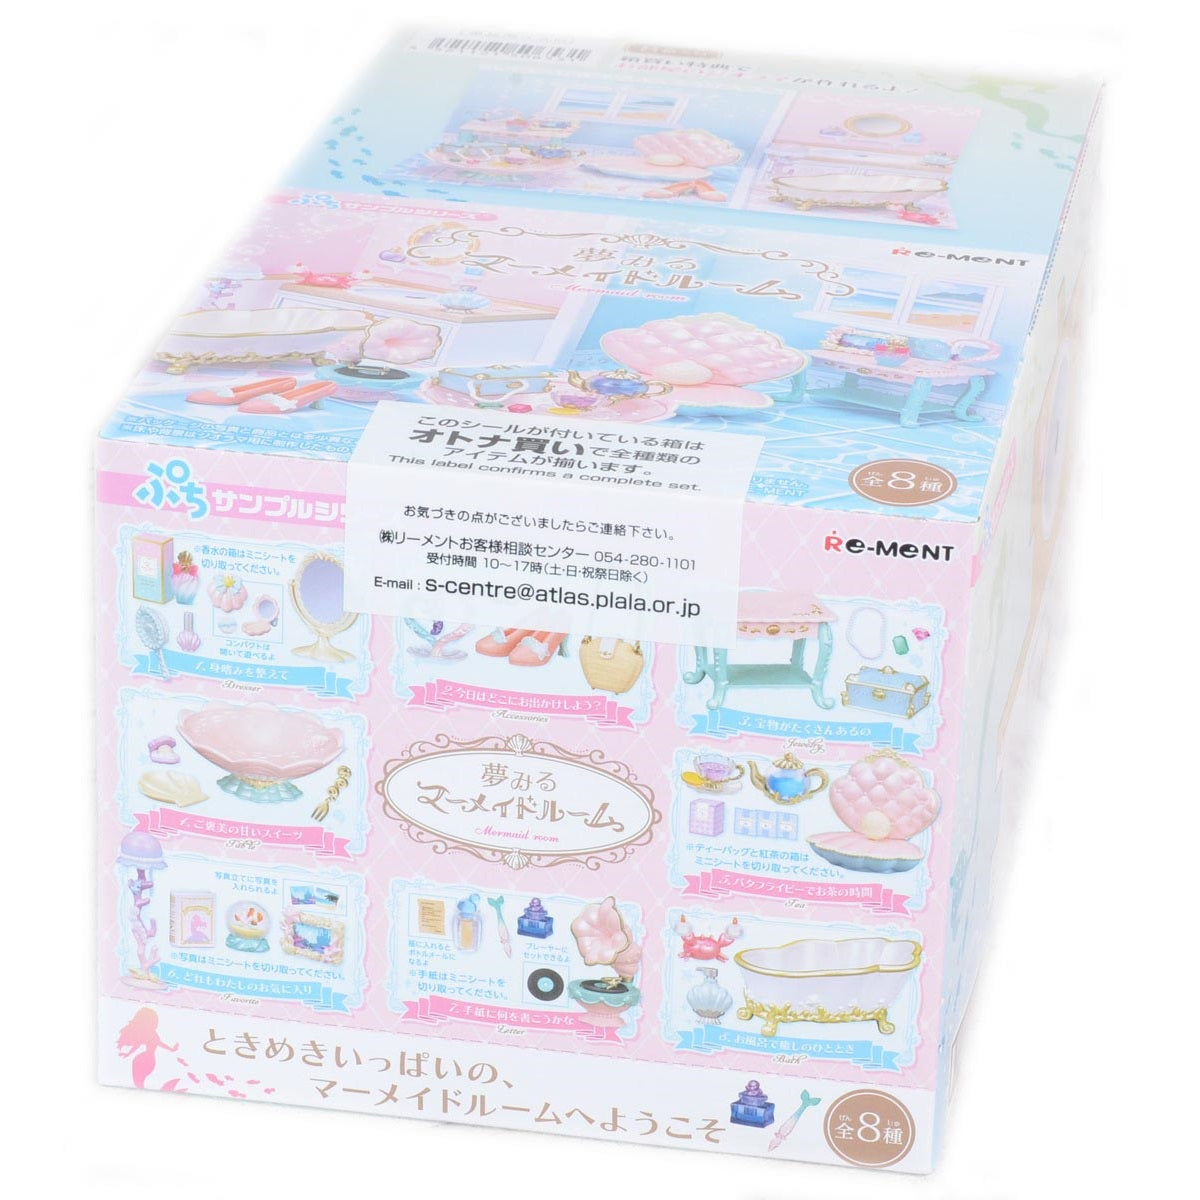 Re-Ment Petit Sample Mermaid Room-Single Box (Random)-Re-Ment-Ace Cards & Collectibles